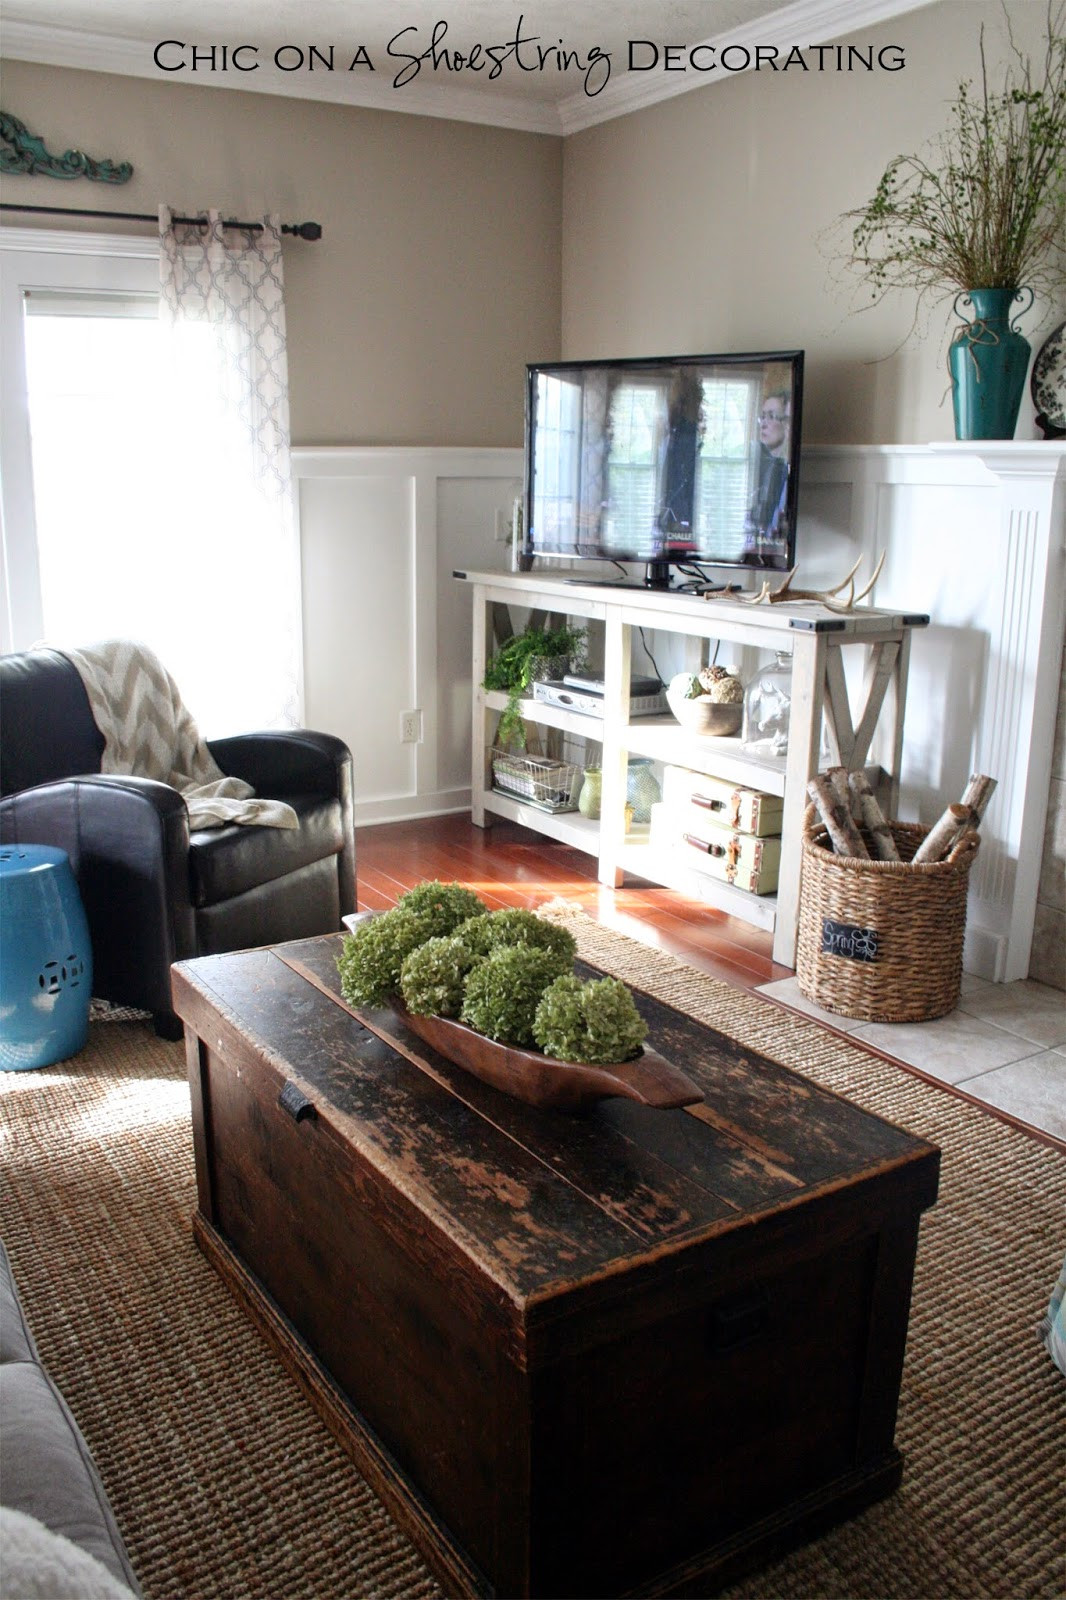 Farmhouse Chic Living Room Awesome Chic On A Shoestring Decorating My Farmhouse Chic Living